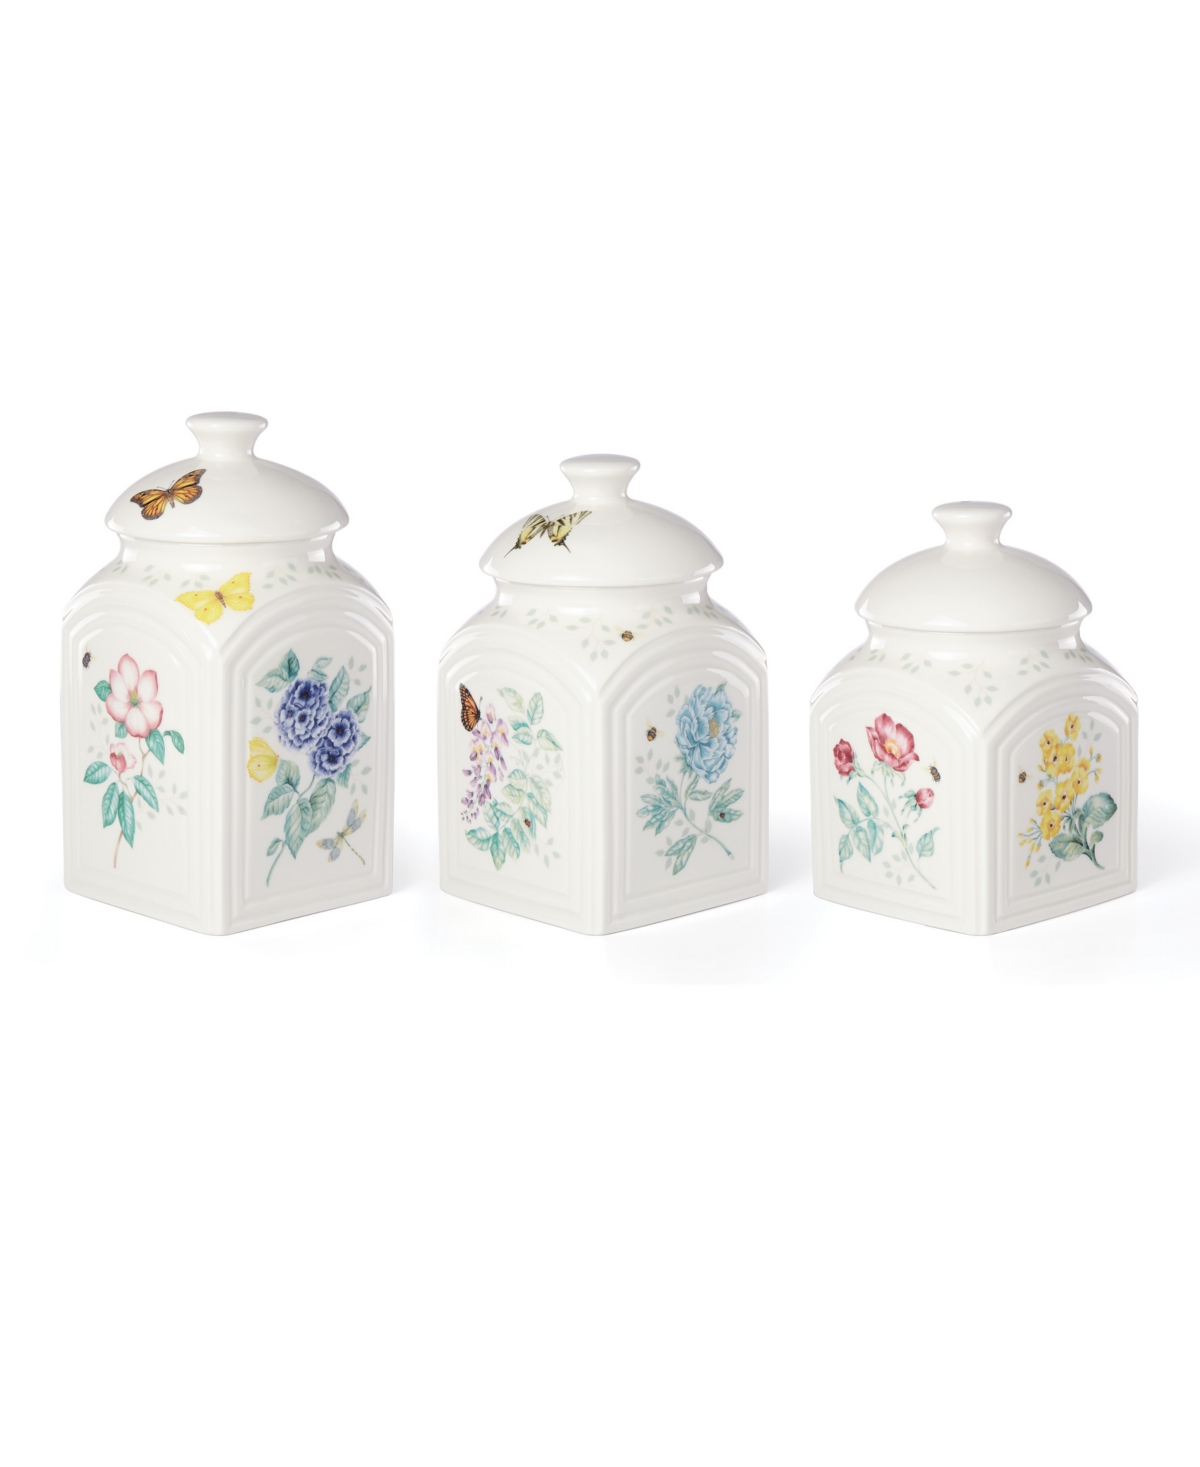 Butterfly Meadow 3 Pc. Canister Set, Created for Macy's - White Body With Butterfly Meadow Multi-c